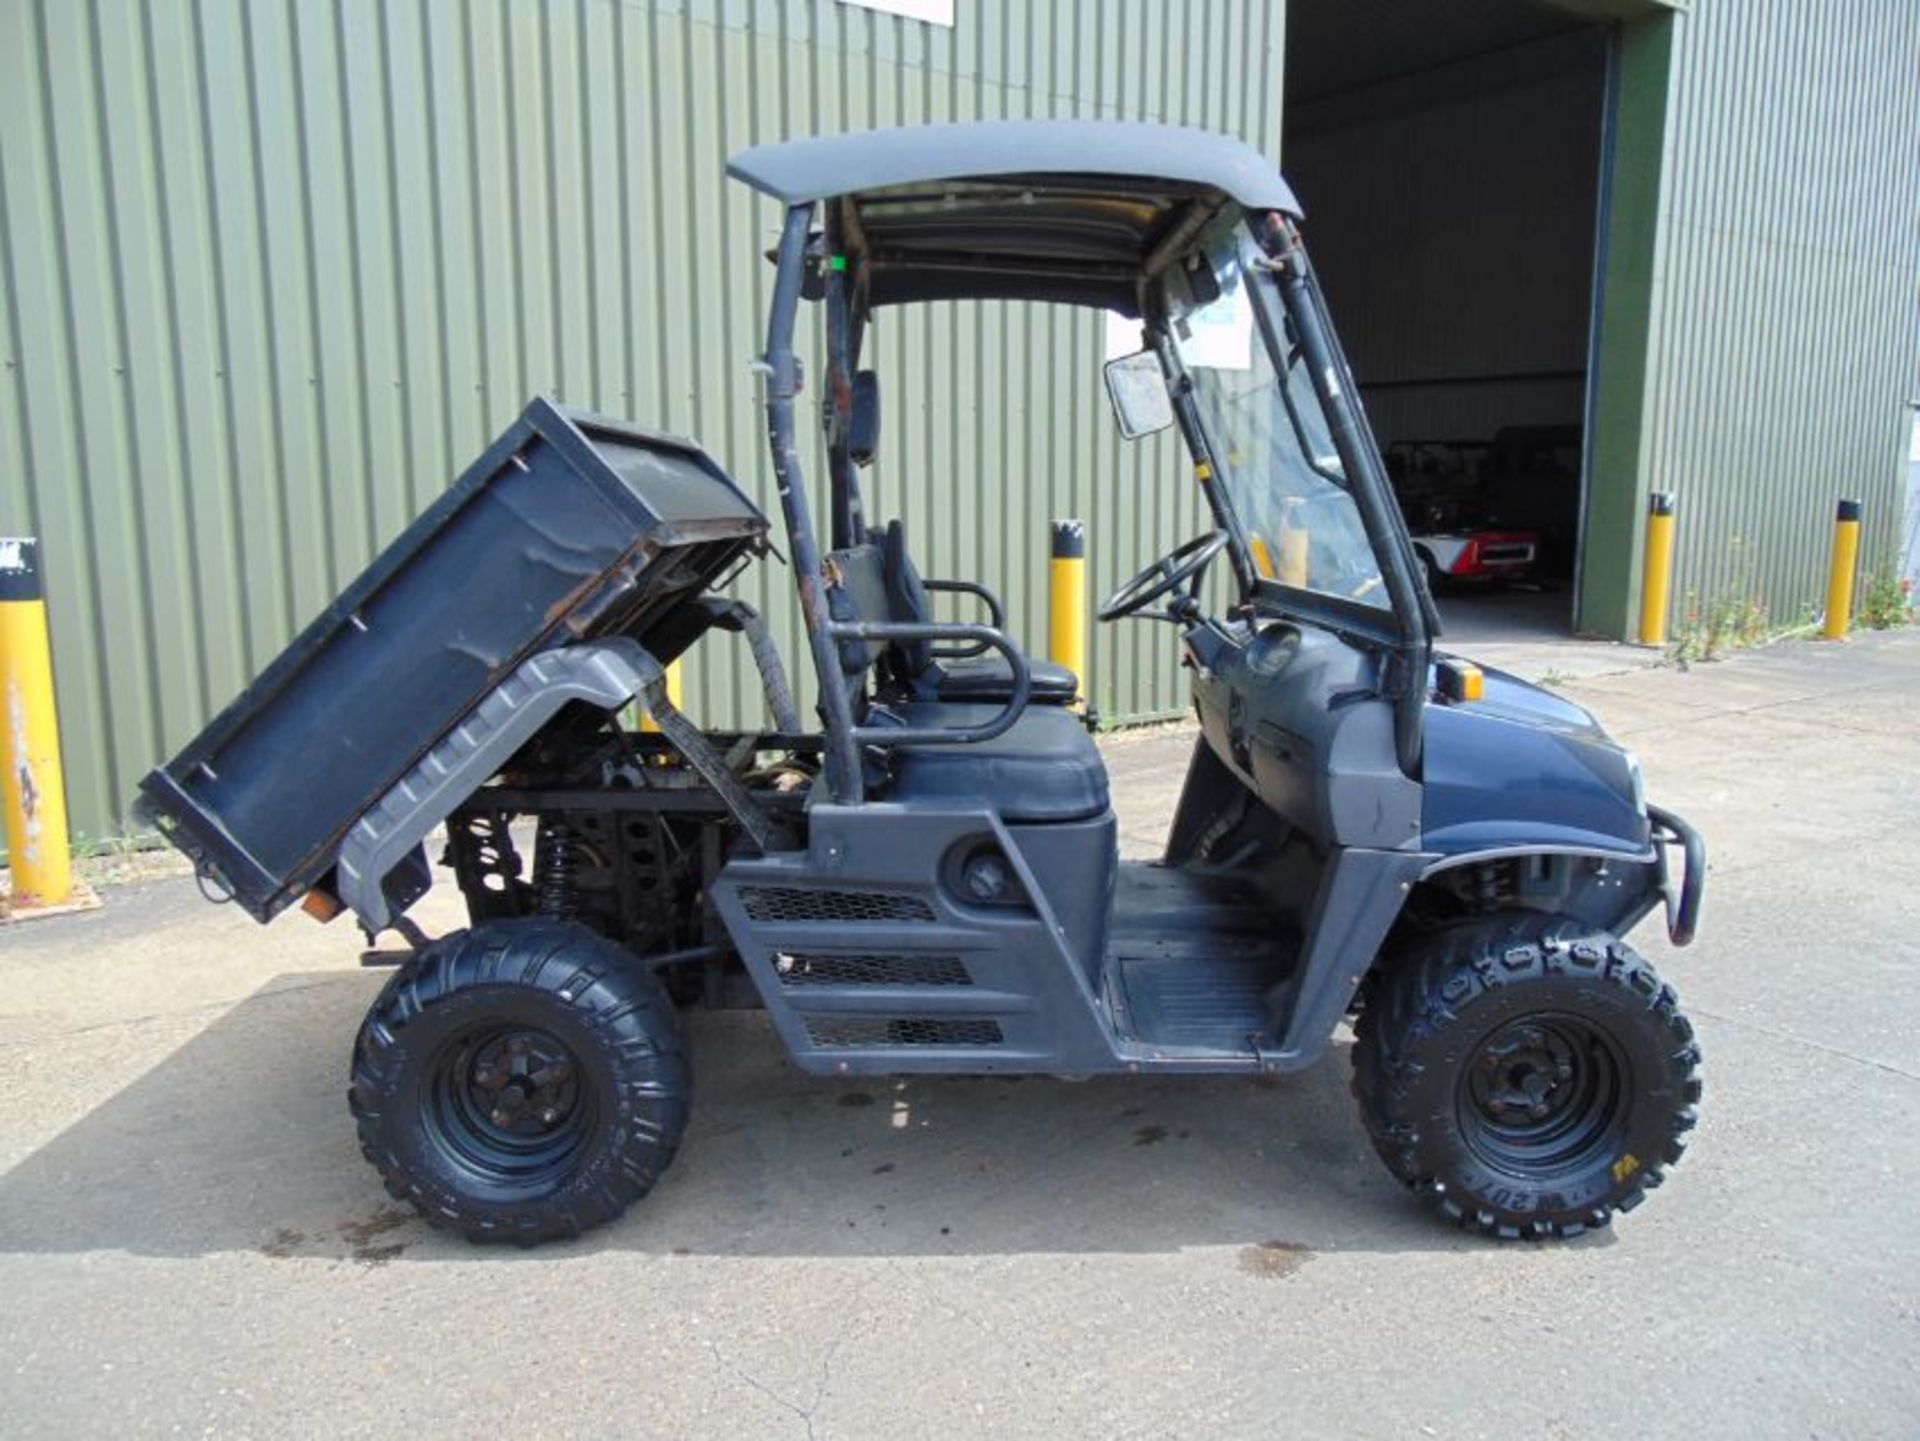 2014 Cushman XD1600 4x4 Diesel Utility Vehicle Showing 1333 hrs - Image 11 of 19